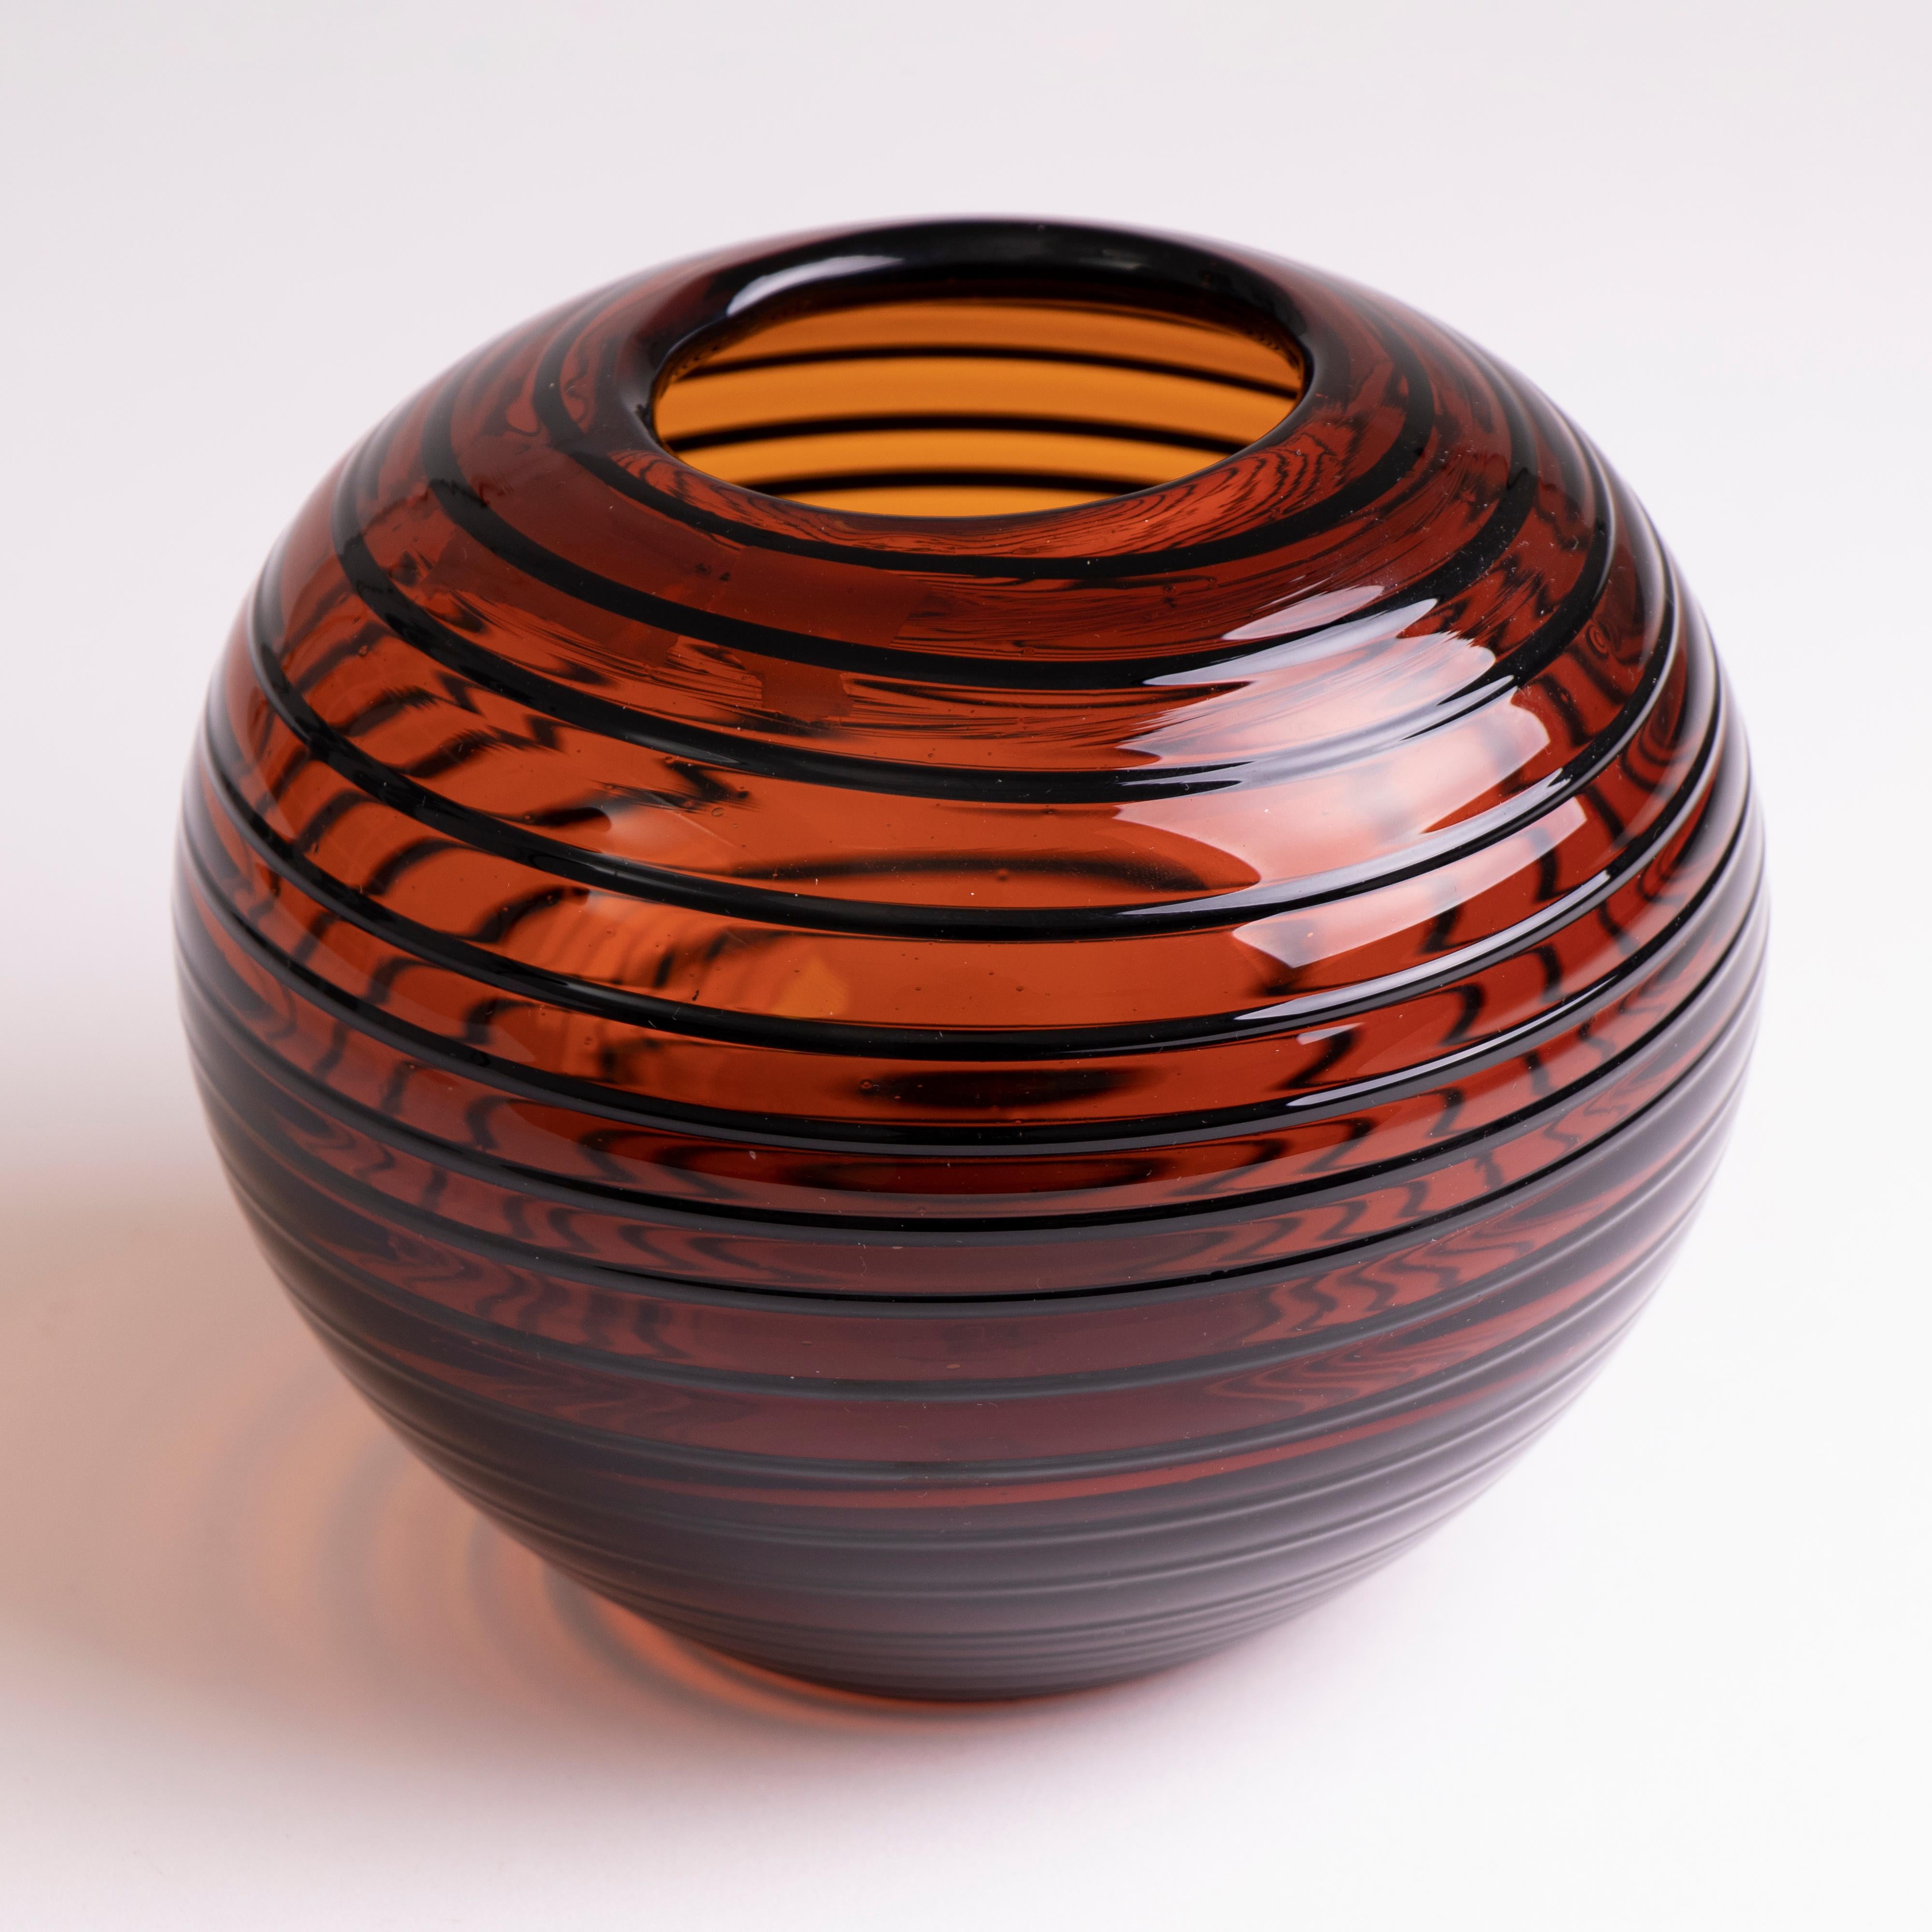 Vintage Czech Tarnowiec amber glass round vase with a deep black swirled pattern around the exterior. A perfect gift. The original label is on the base.

Dimensions: Depth 150mm, width 150mm, height 130mm.